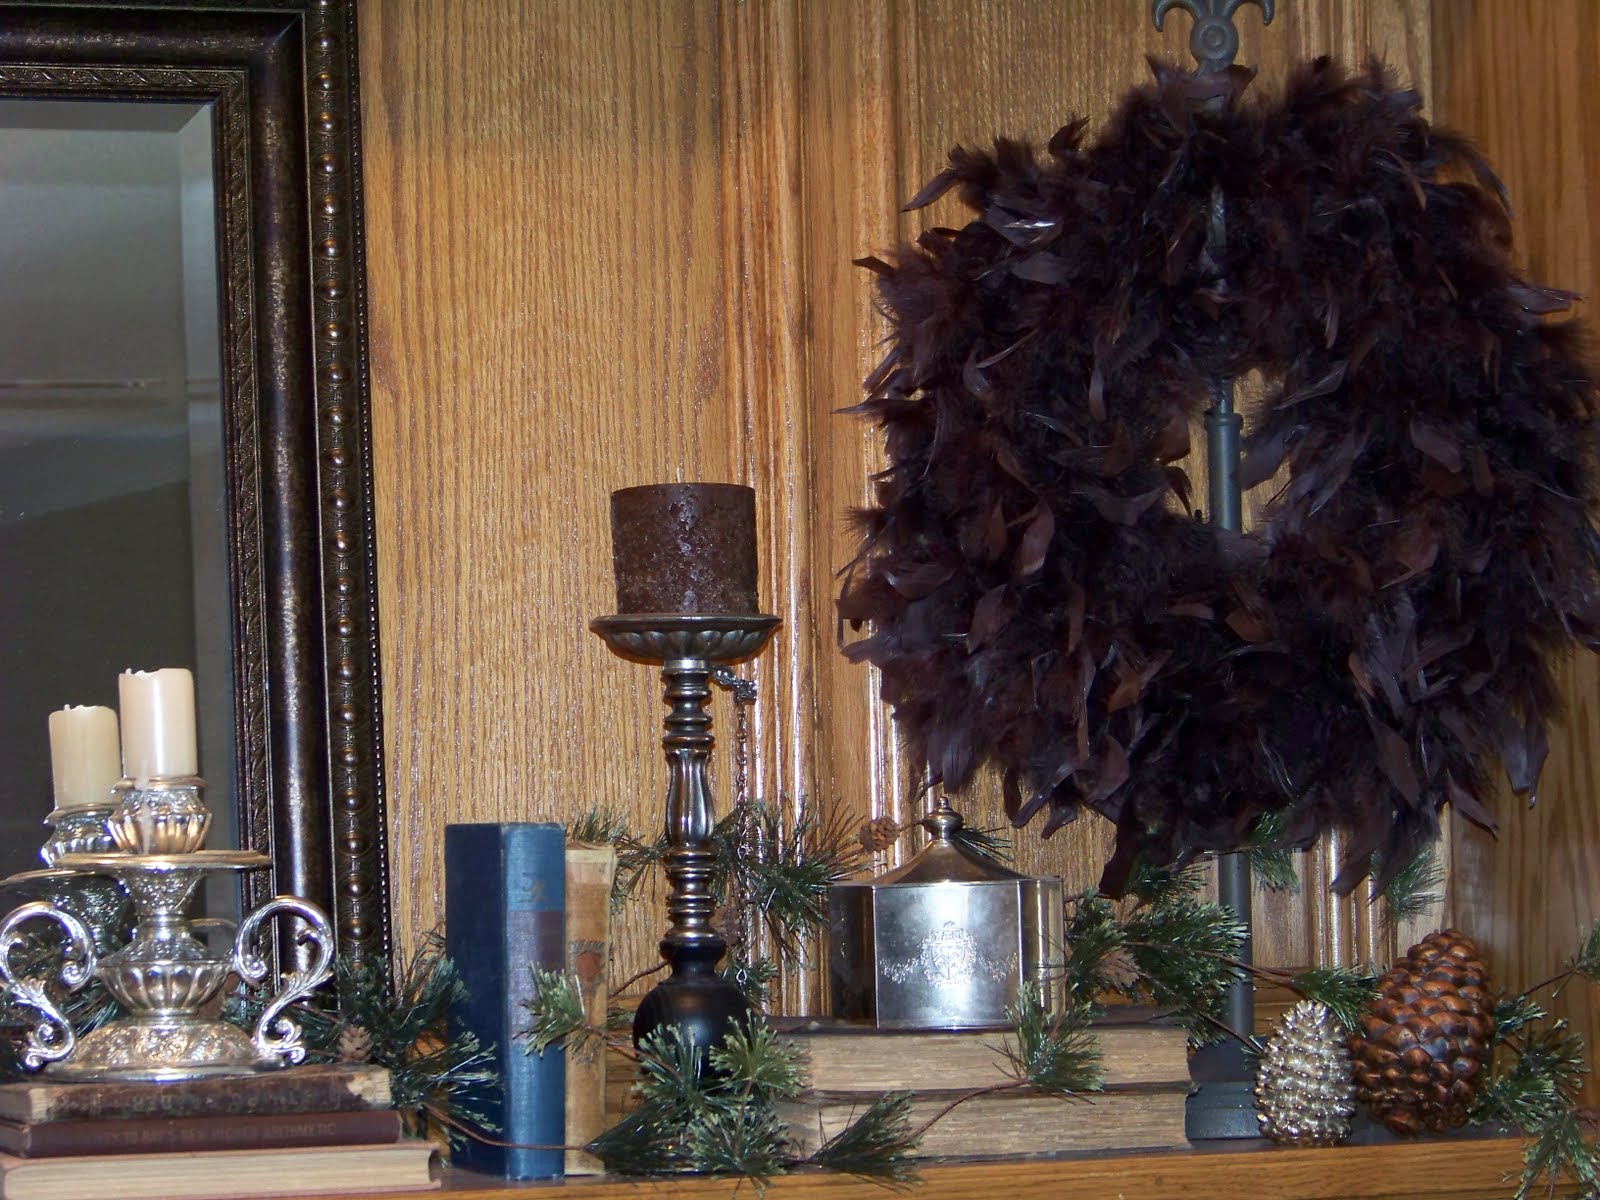 Silver Trappings: Thanksgiving Table and Mantel Decorations